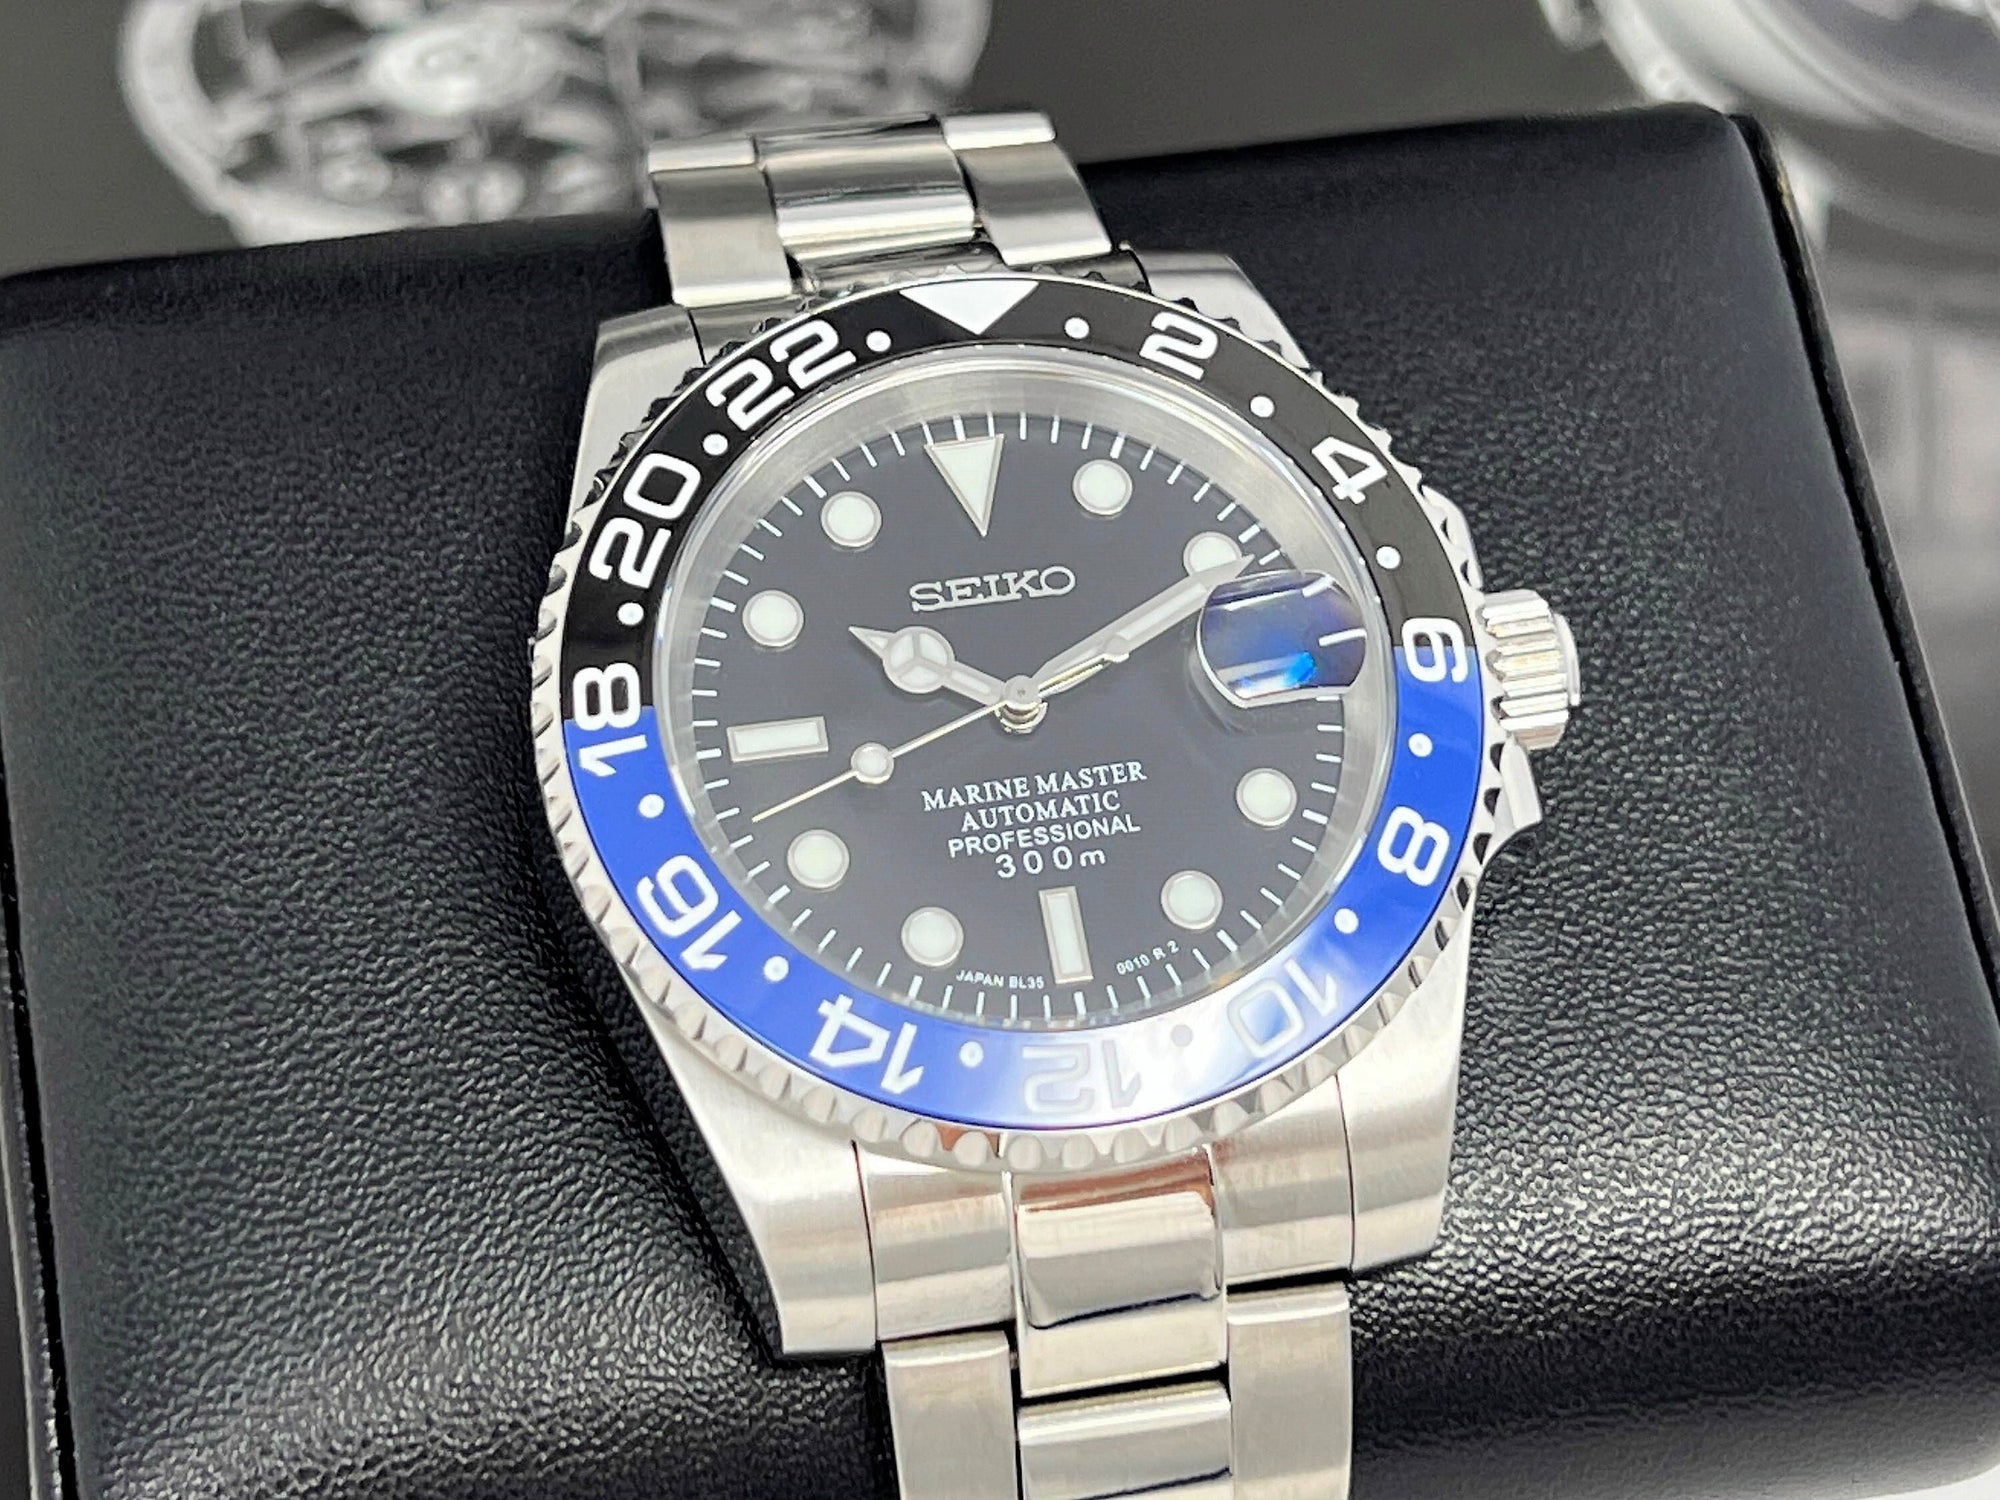 Custom Batman Stainless Steel Sport Watch | Sapphire Crystal | Watch Mod | Submariner | Sub Dive Watch with Seiko NH35 Automatic Movement